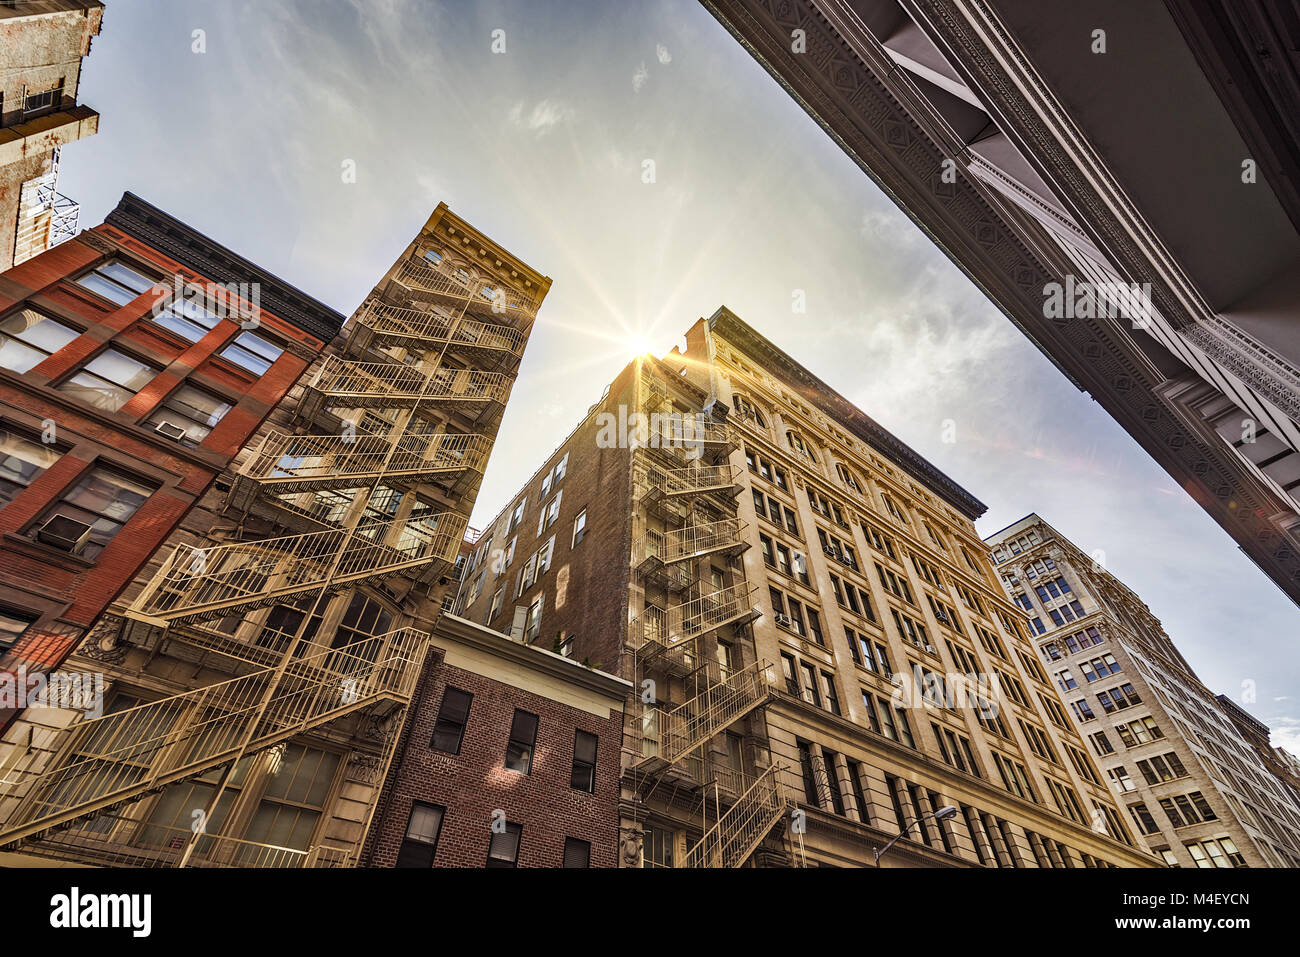 apartment buildings and fire escapes Stock Photo